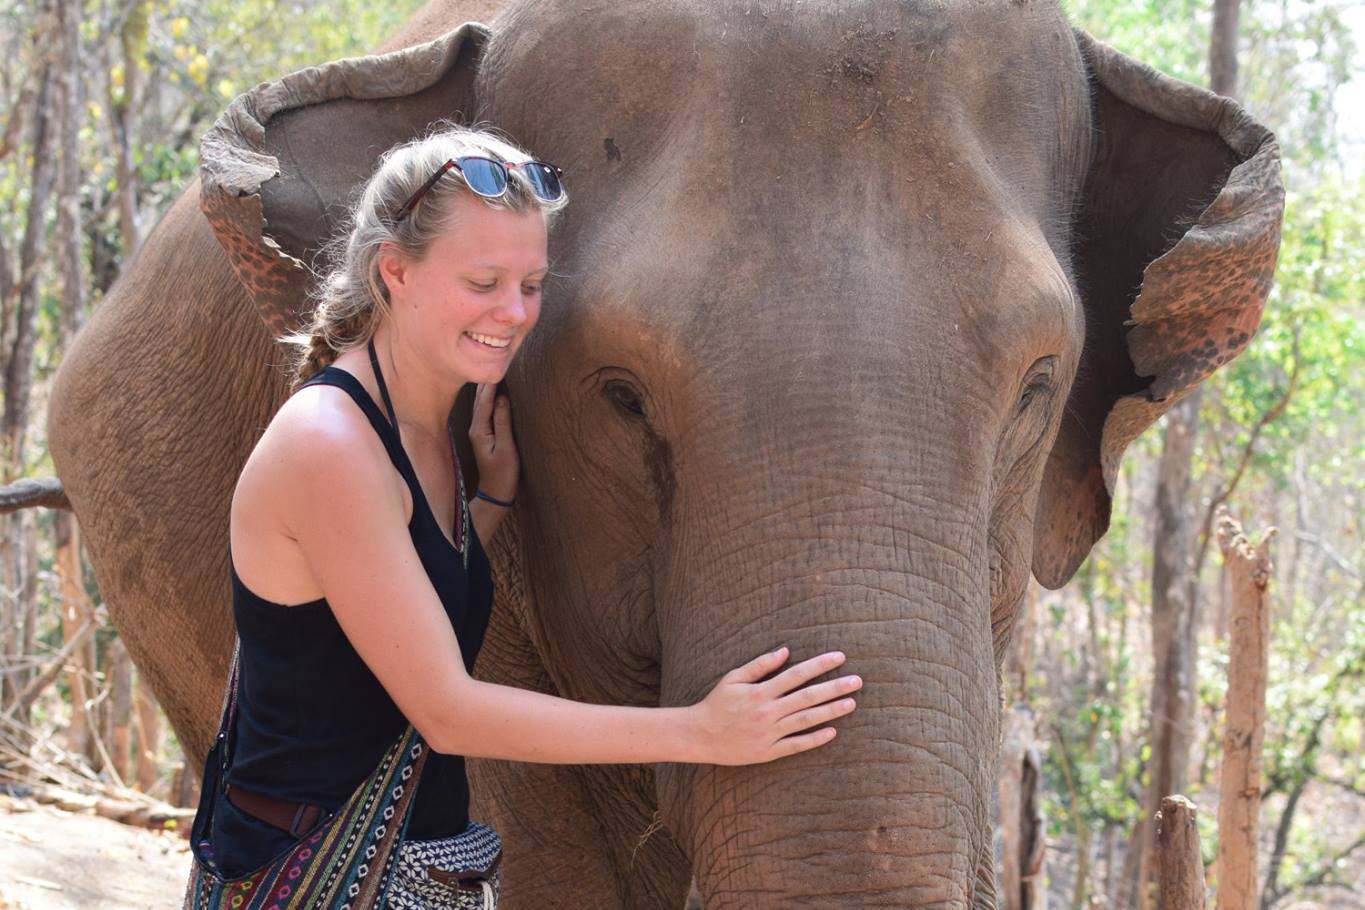 Woman petting elephant while studying abroad